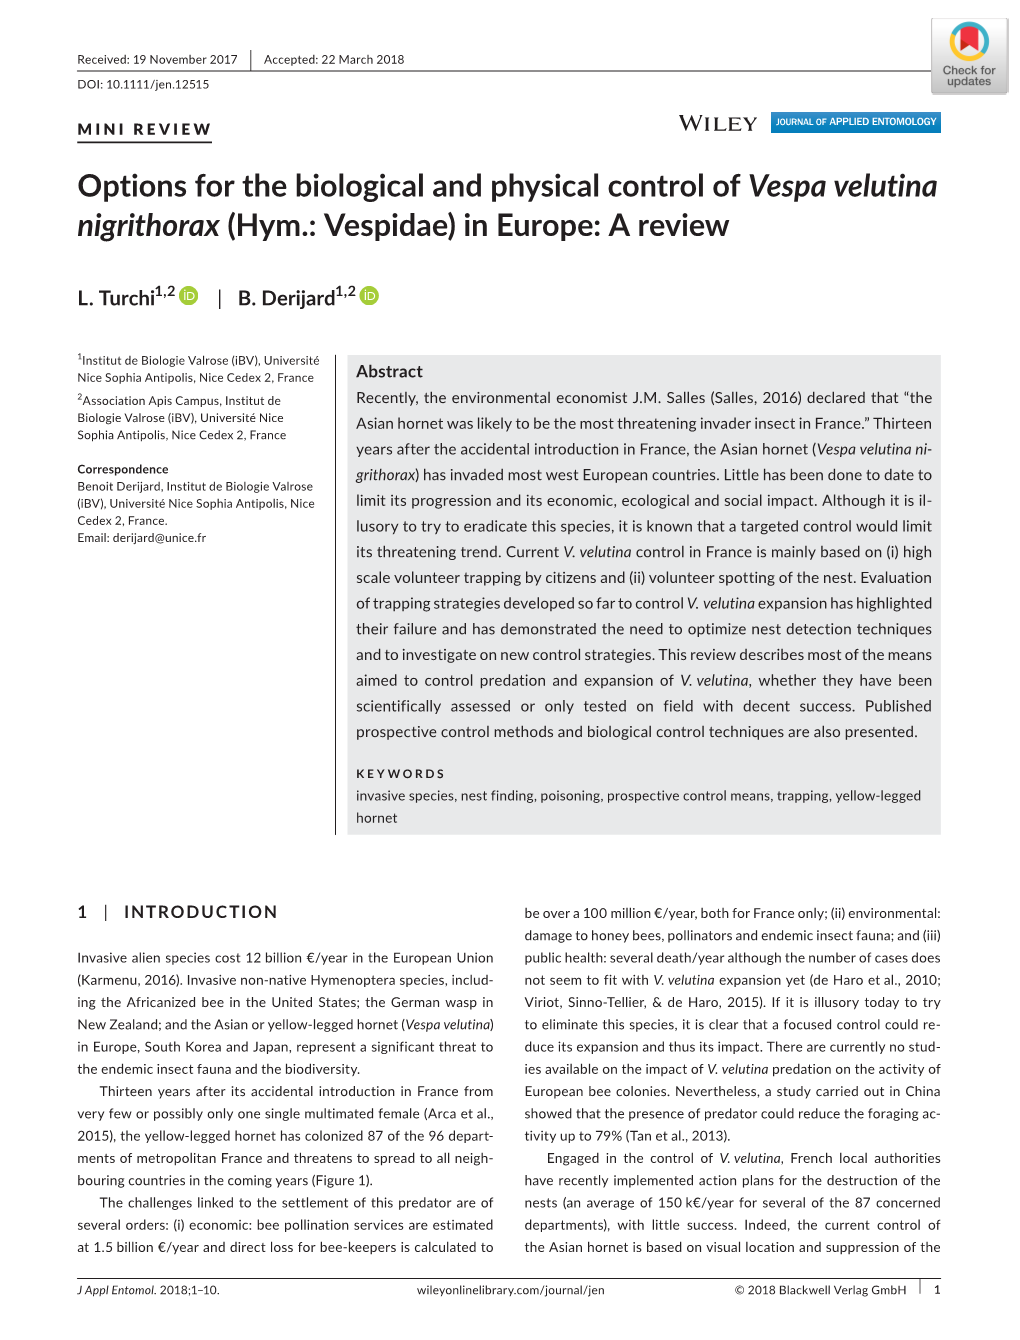 Options for the Biological and Physical Control of Vespa Velutina Nigrithorax (Hym.: Vespidae) in Europe: a Review